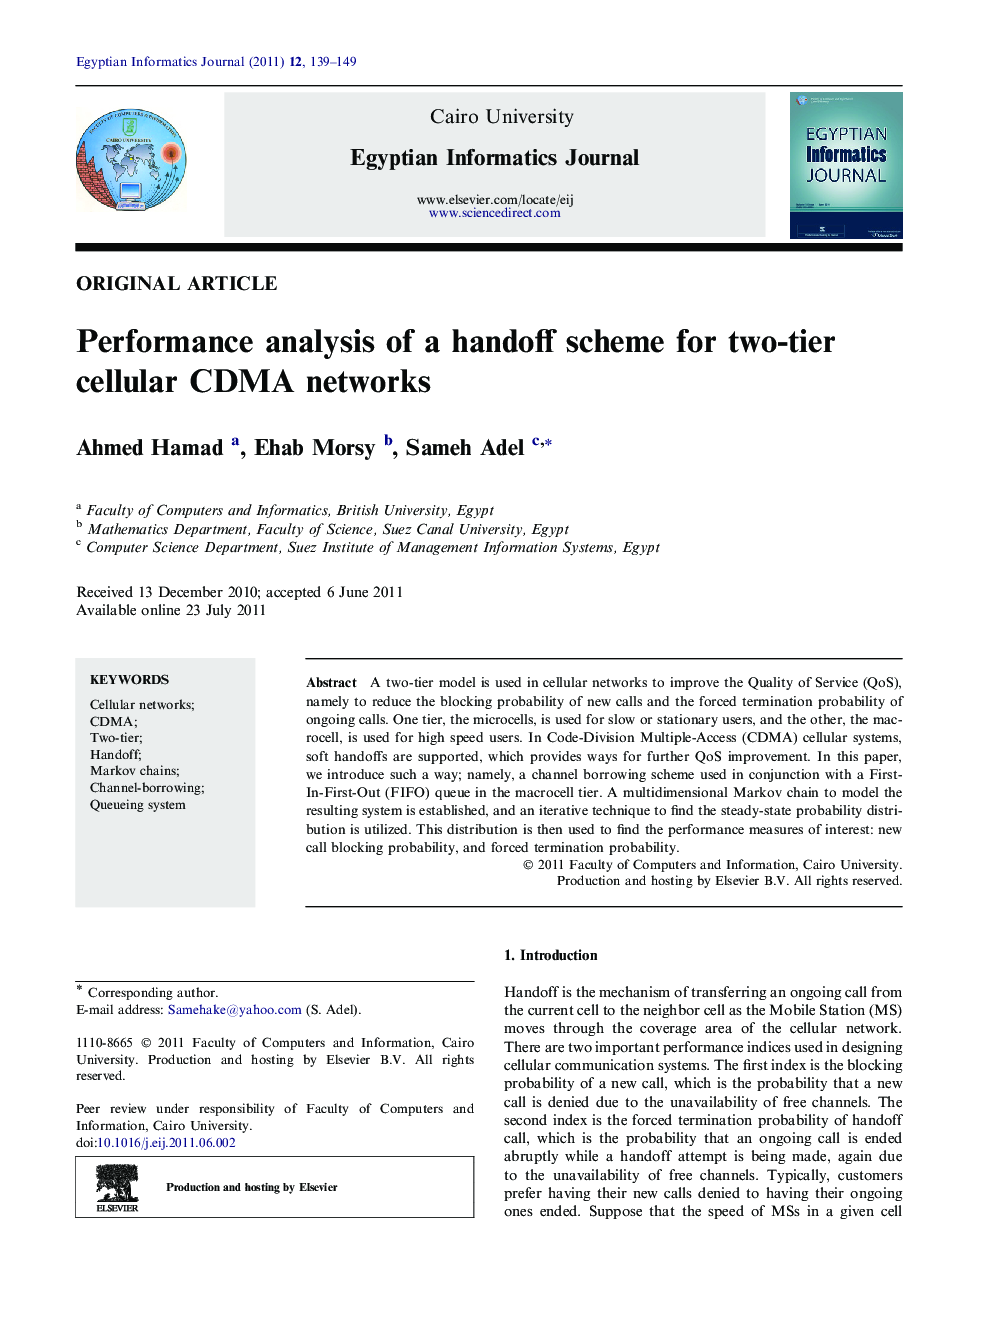 Performance analysis of a handoff scheme for two-tier cellular CDMA networks